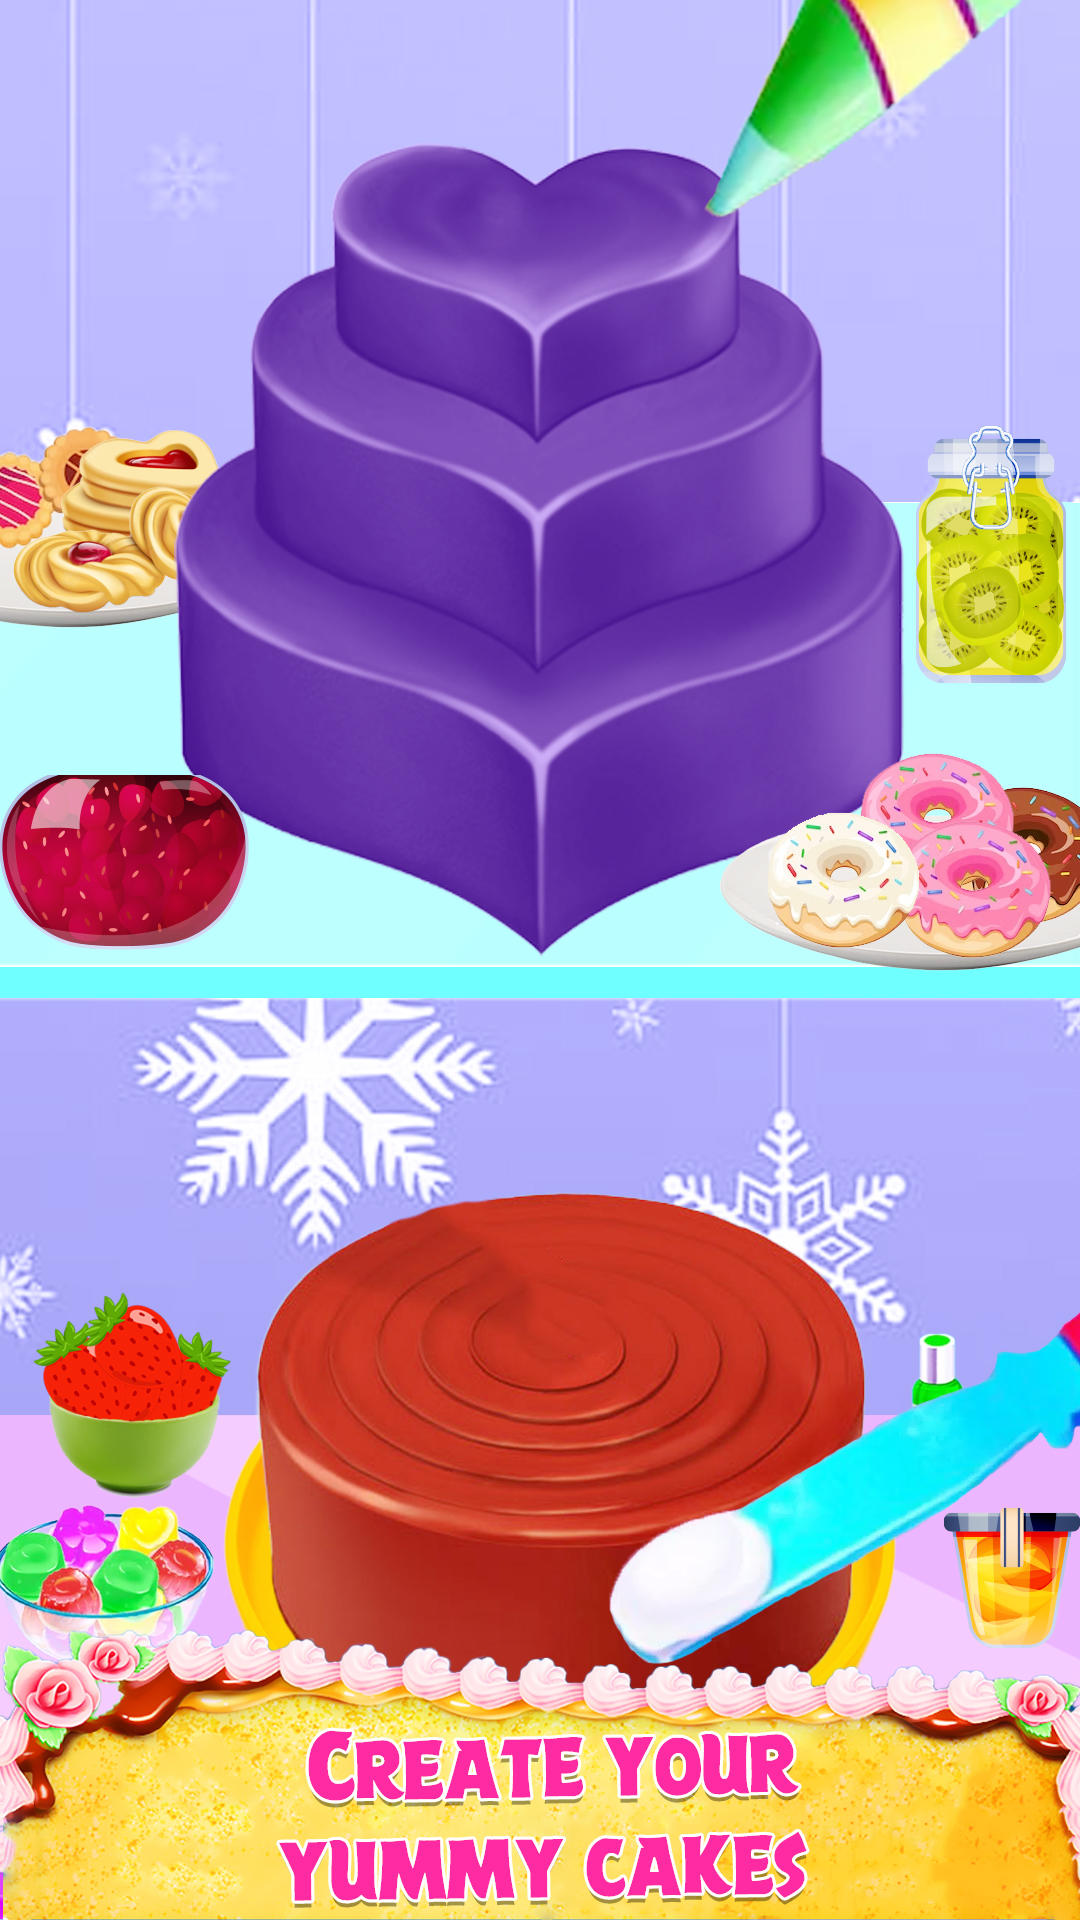 Play Sweet Bakery Chef Mania Cake Games For Girls | Free Online Games.  KidzSearch.com